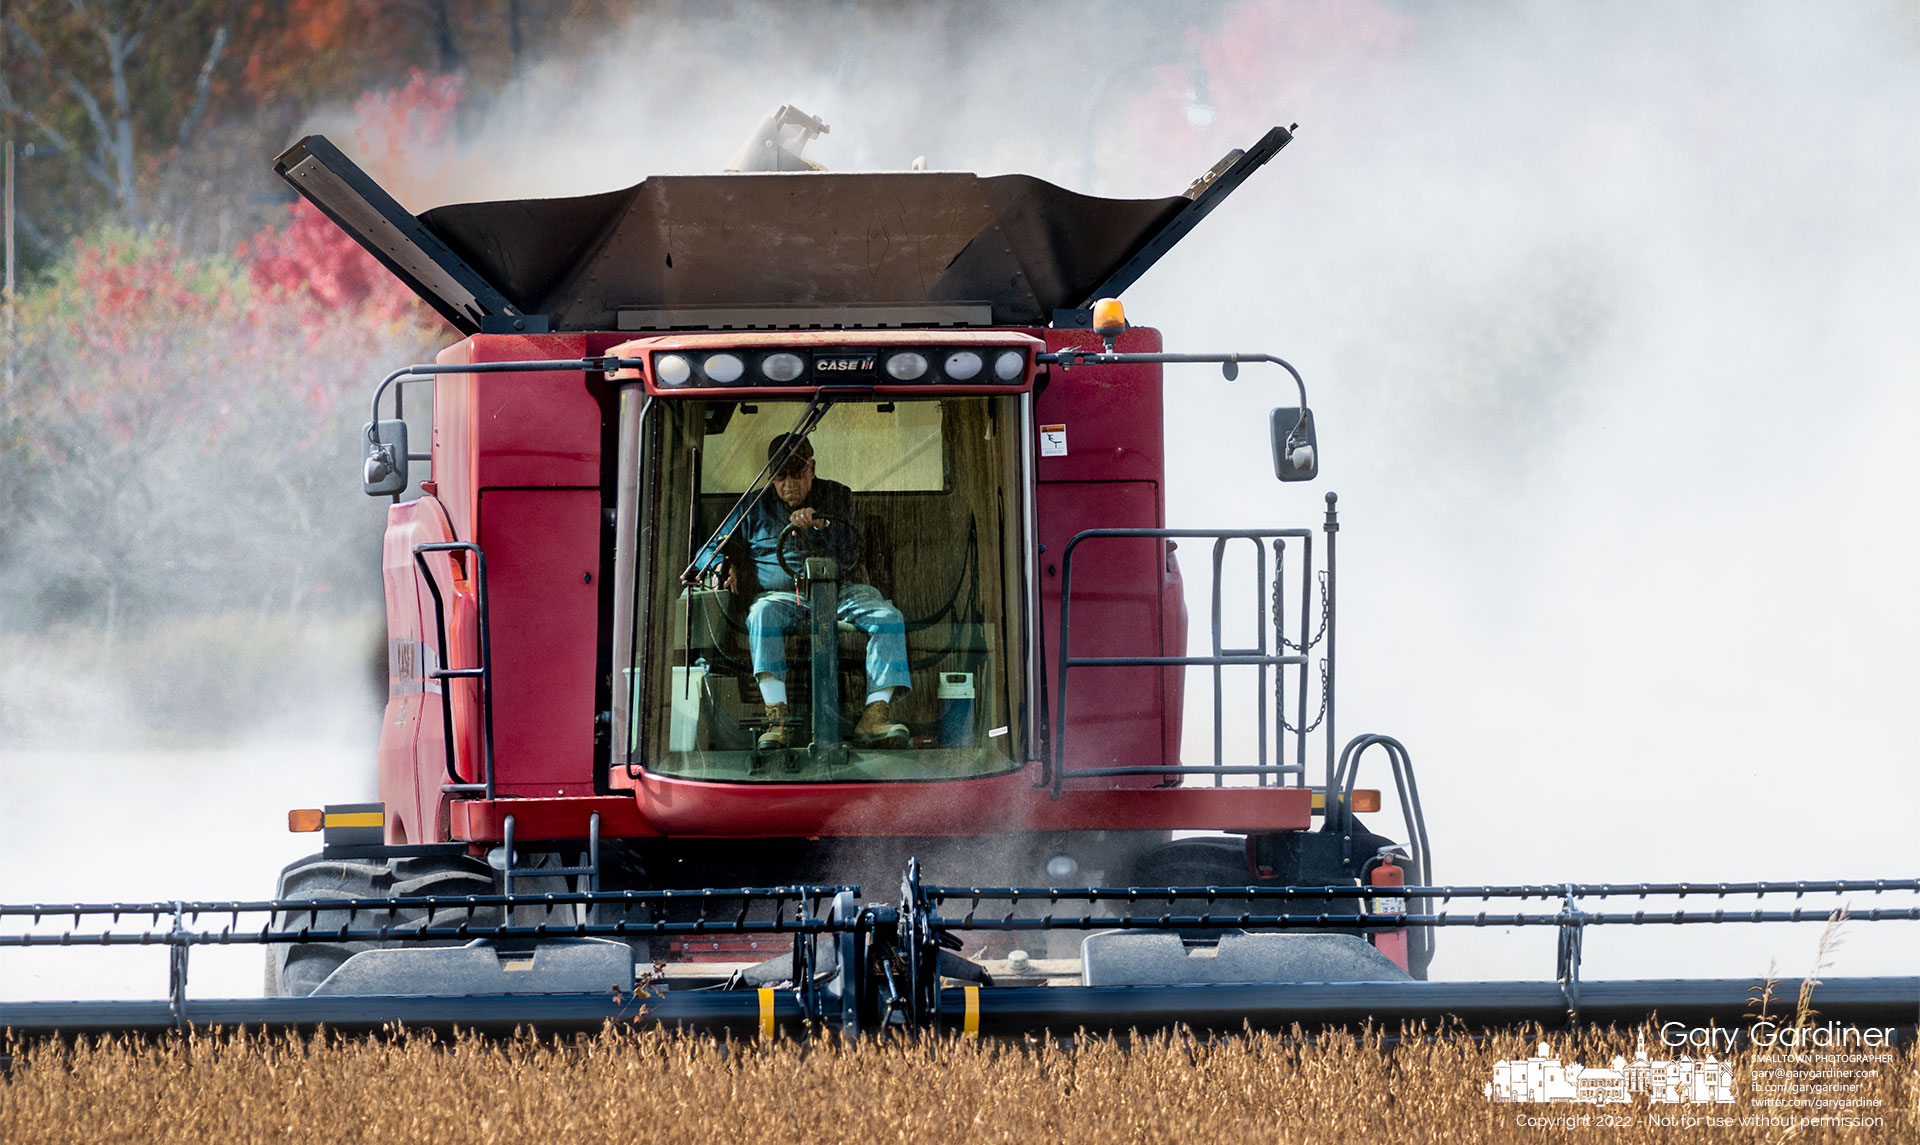 A cloud of dust created when harvesting soybeans trails a combine moving through the lower field at the Yarnell Farm. My Final Photo for October 16, 2022.